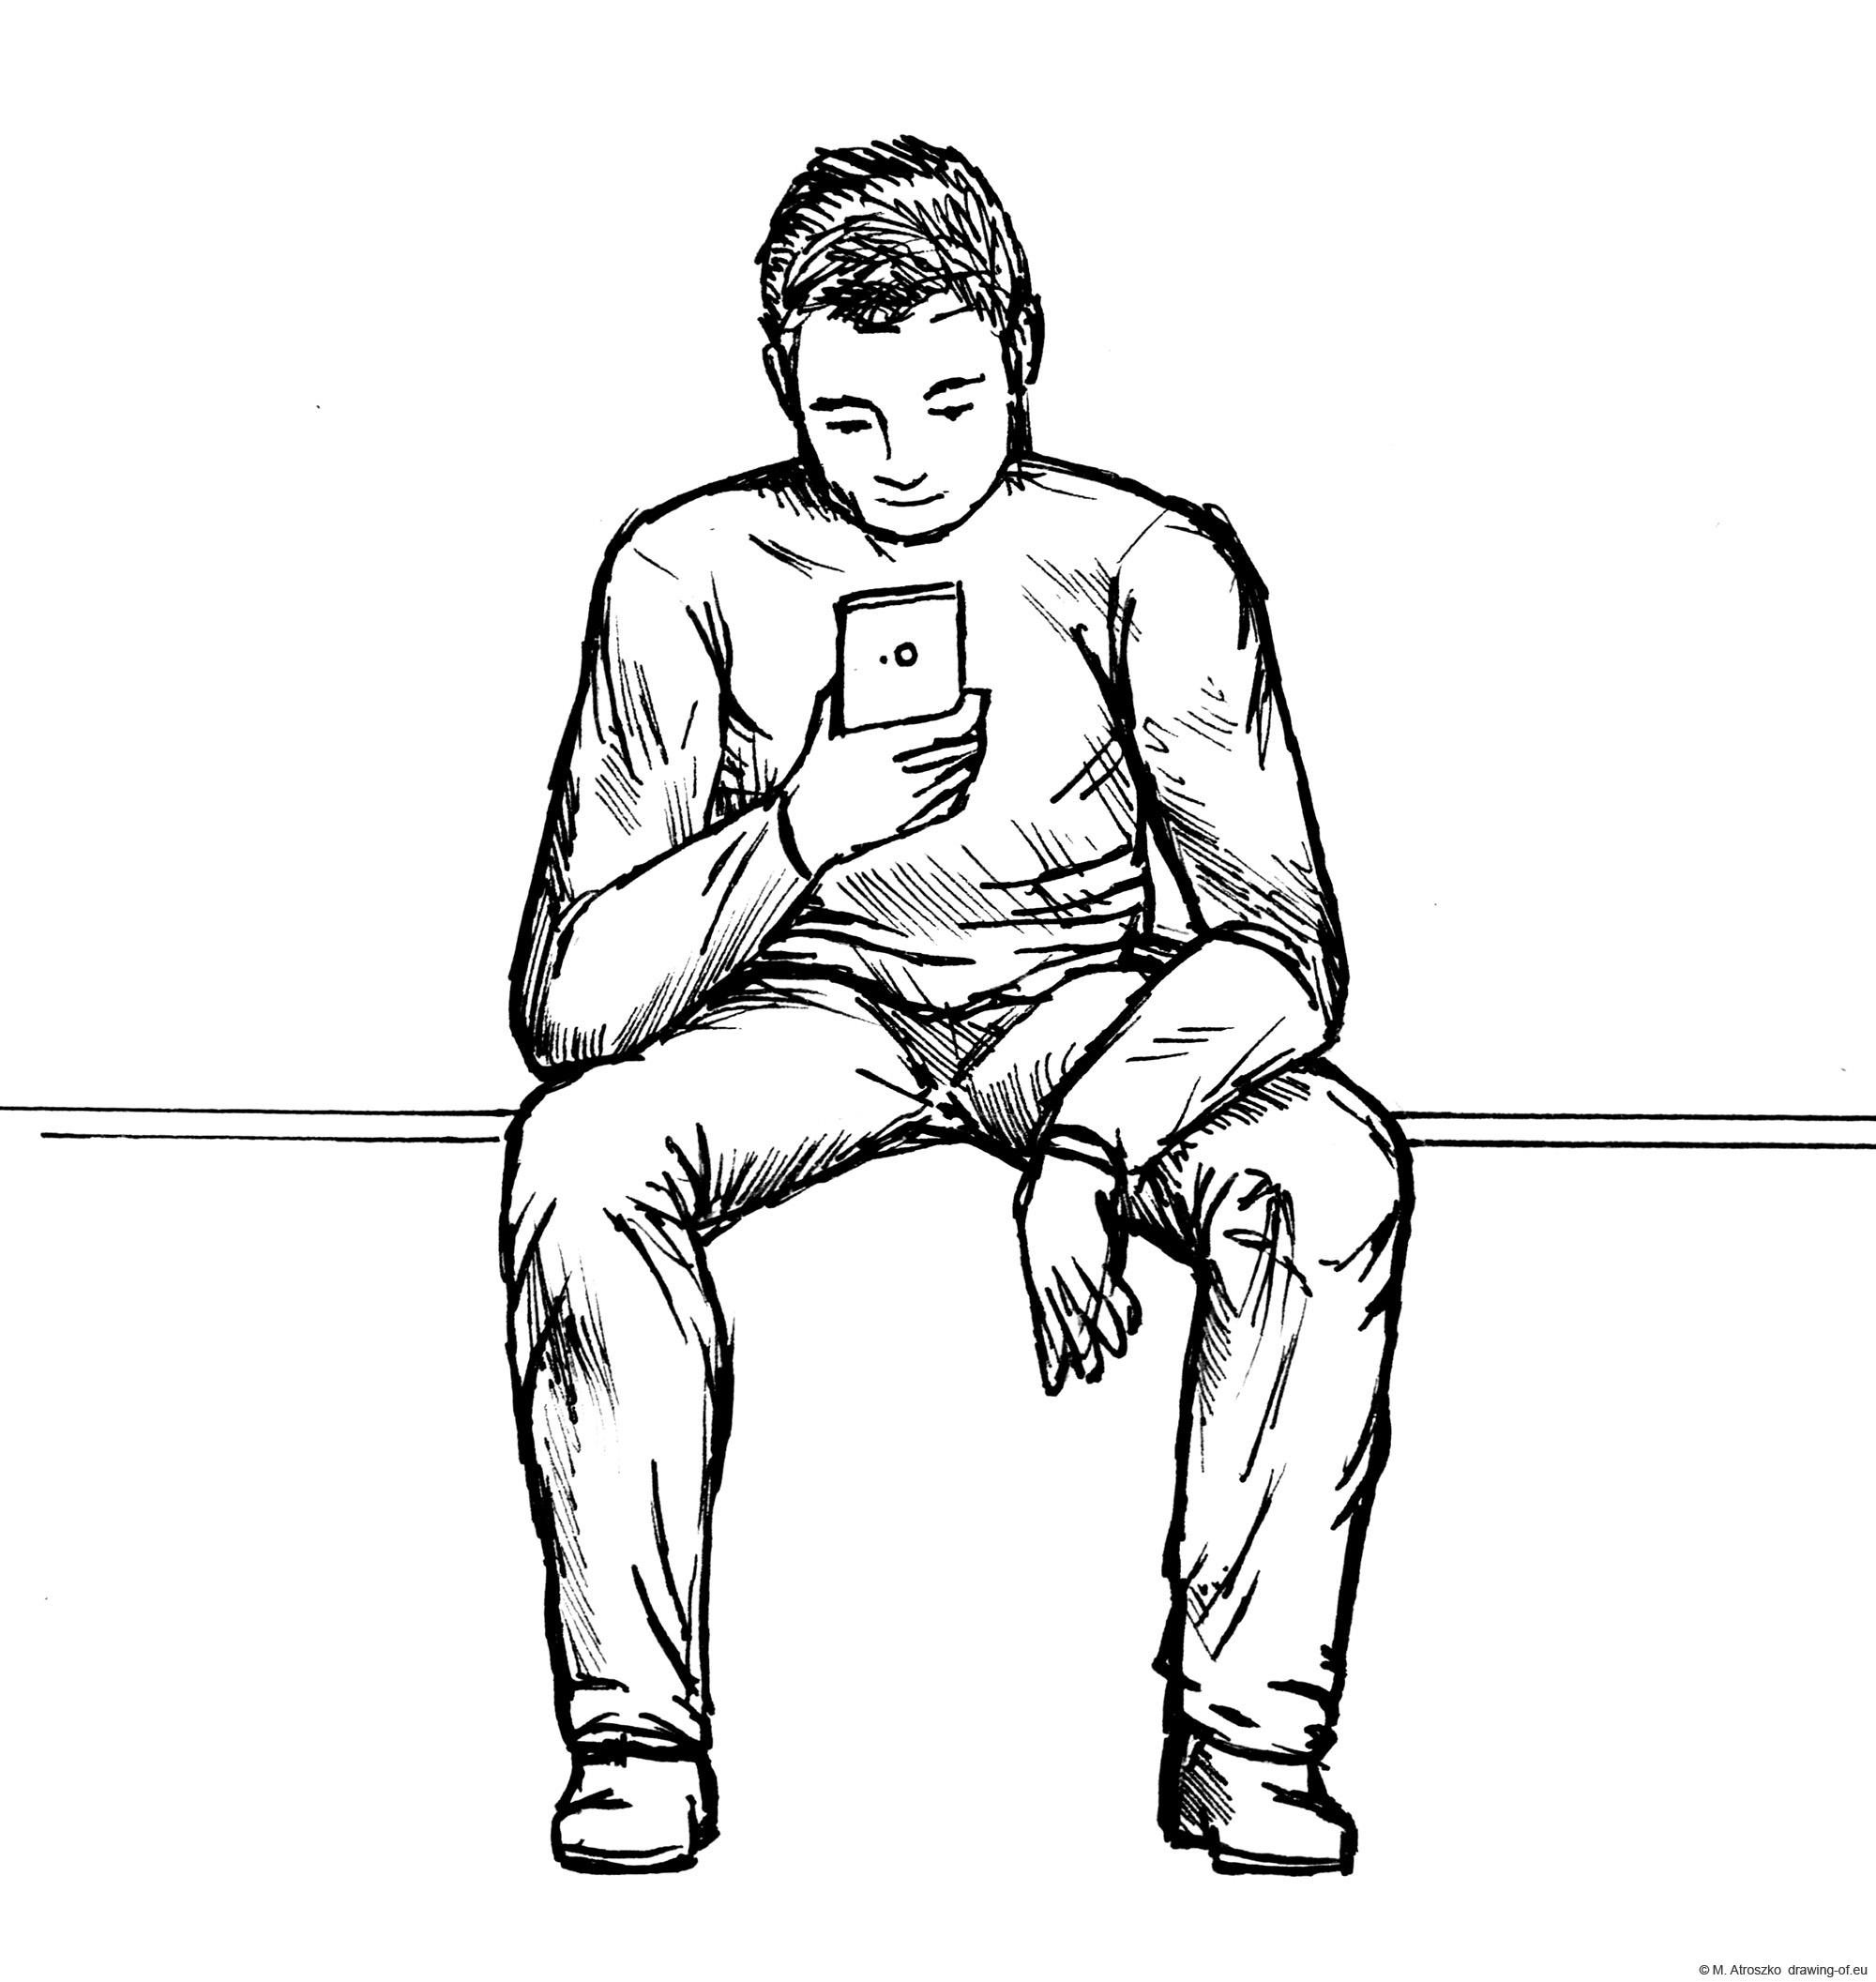 Man sitting on bench with smartphone